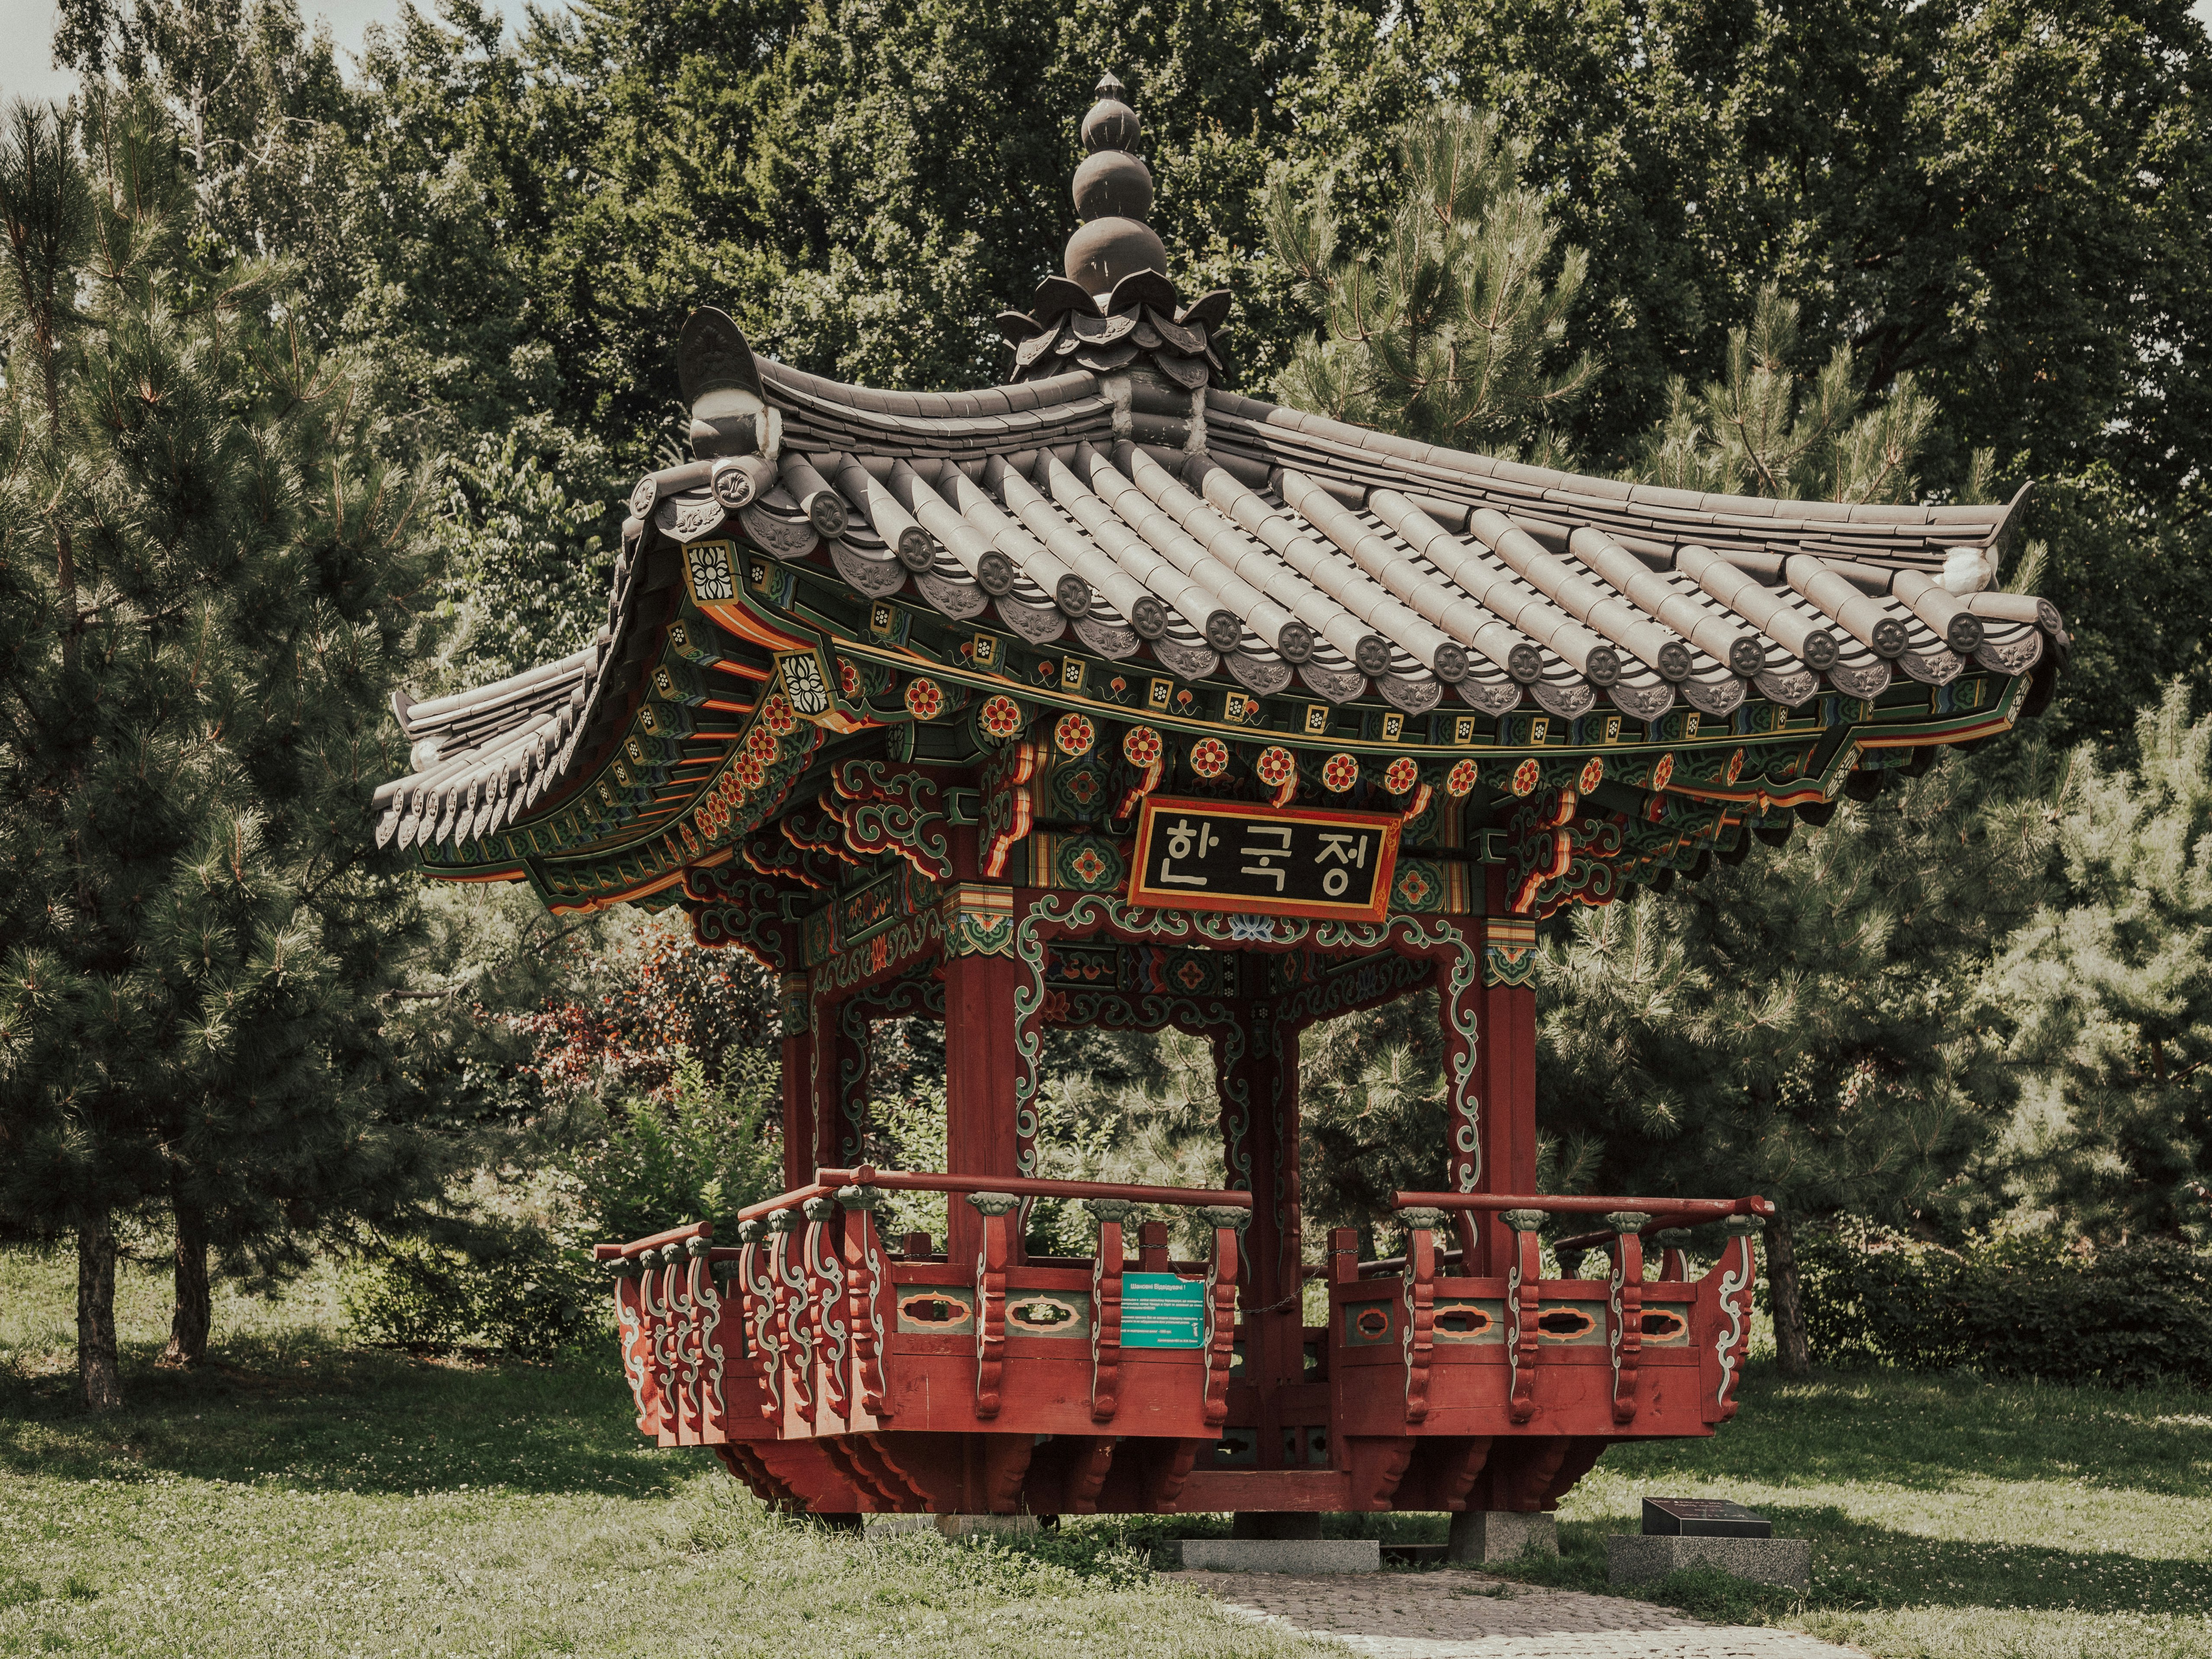 Korean Pavilion (Pagoda) which is similar to the pavilion “Aeryundzhun” located in the Palace Changduk in Seoul Korea

2019, Korean Traditional Garden in Kiev